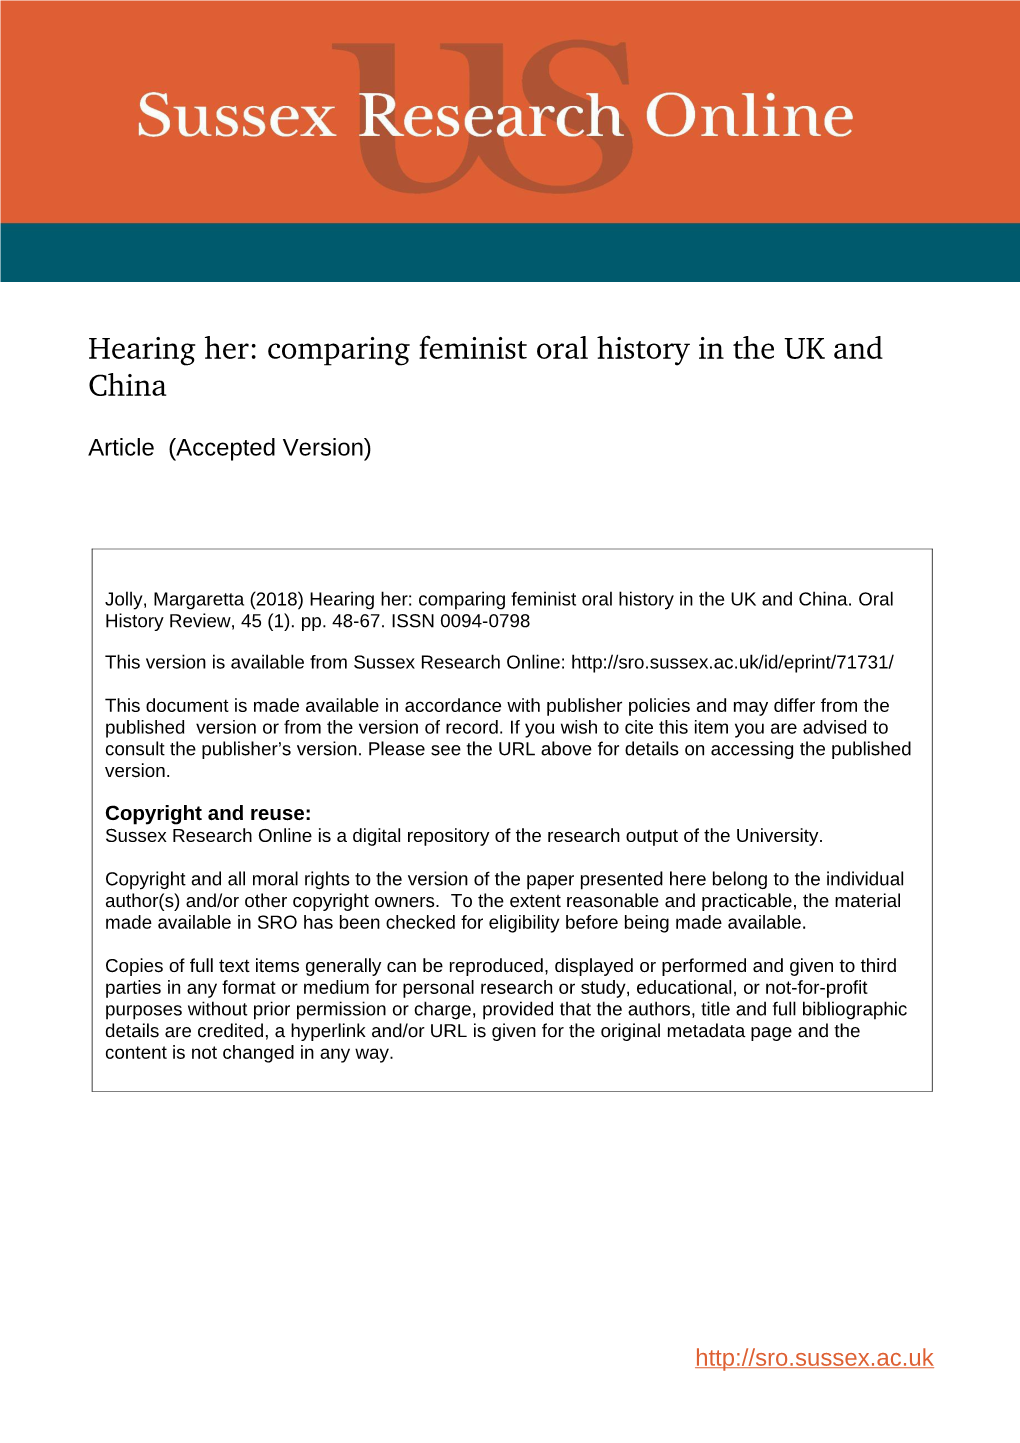 Hearing Her: Comparing Feminist Oral History in the UK and China